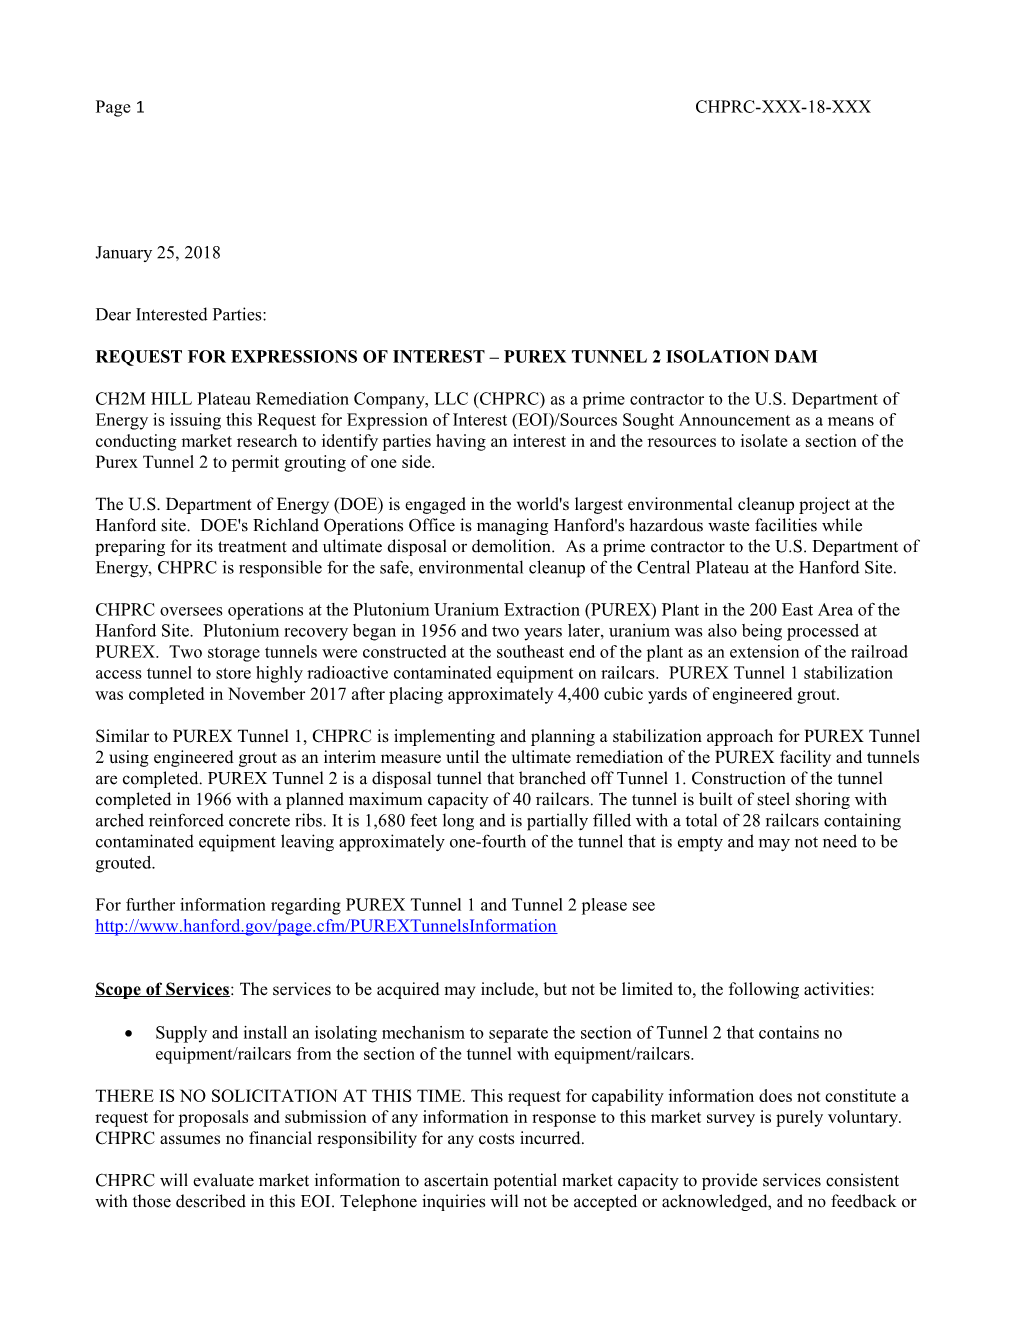 Request for Expressions of Interest Purex Tunnel 2 Isolation Dam